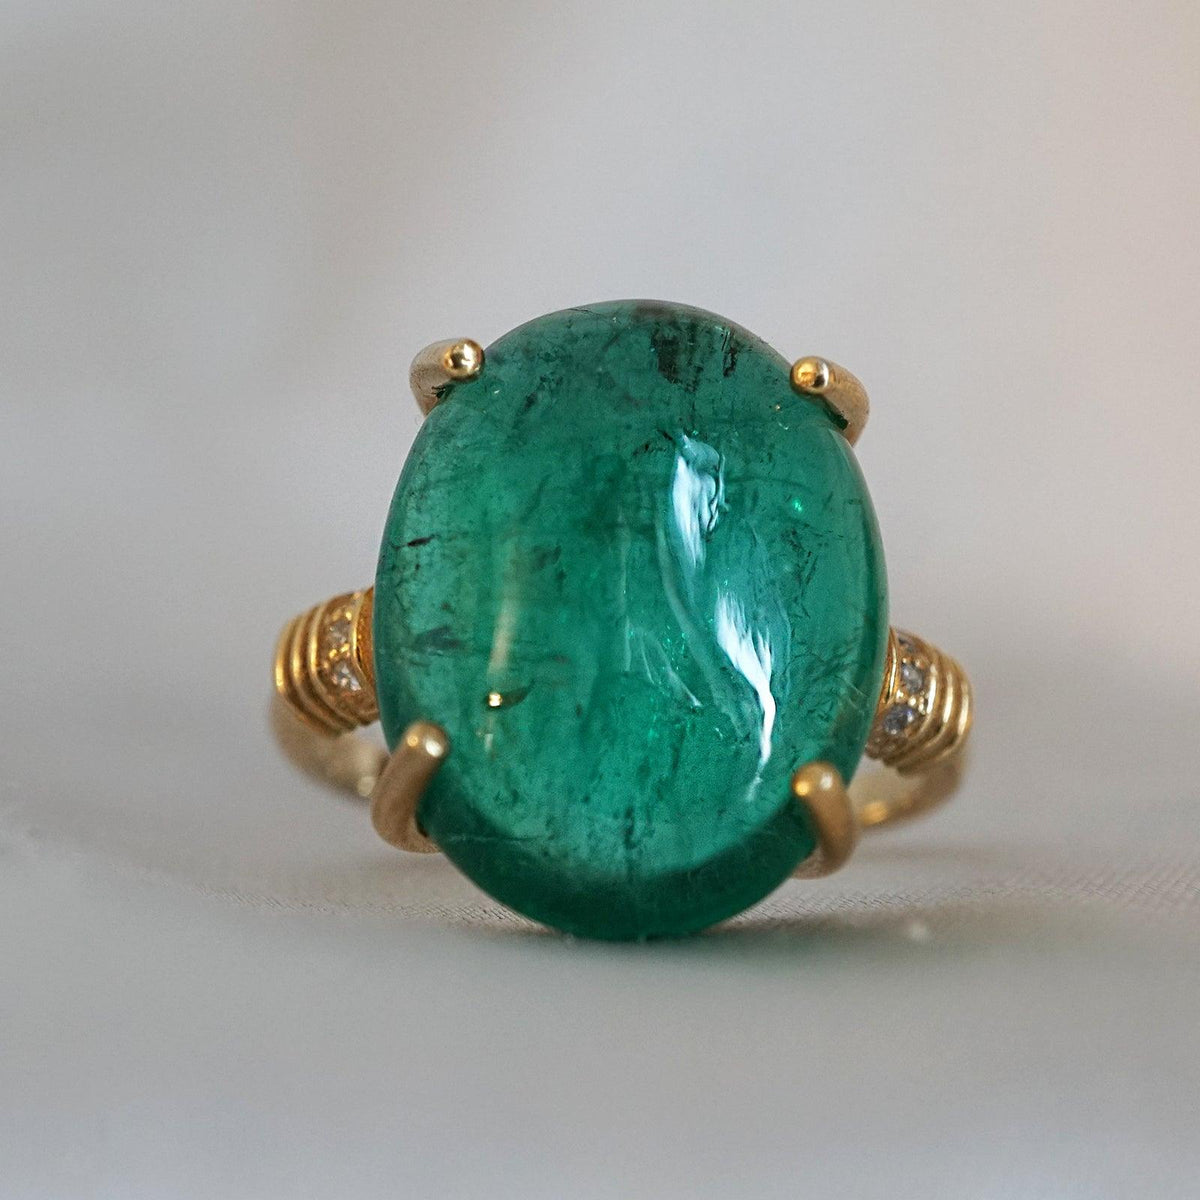 One Of A Kind: Oval Cabochon Emerald Diamond ring, 9ct - Tippy Taste Jewelry